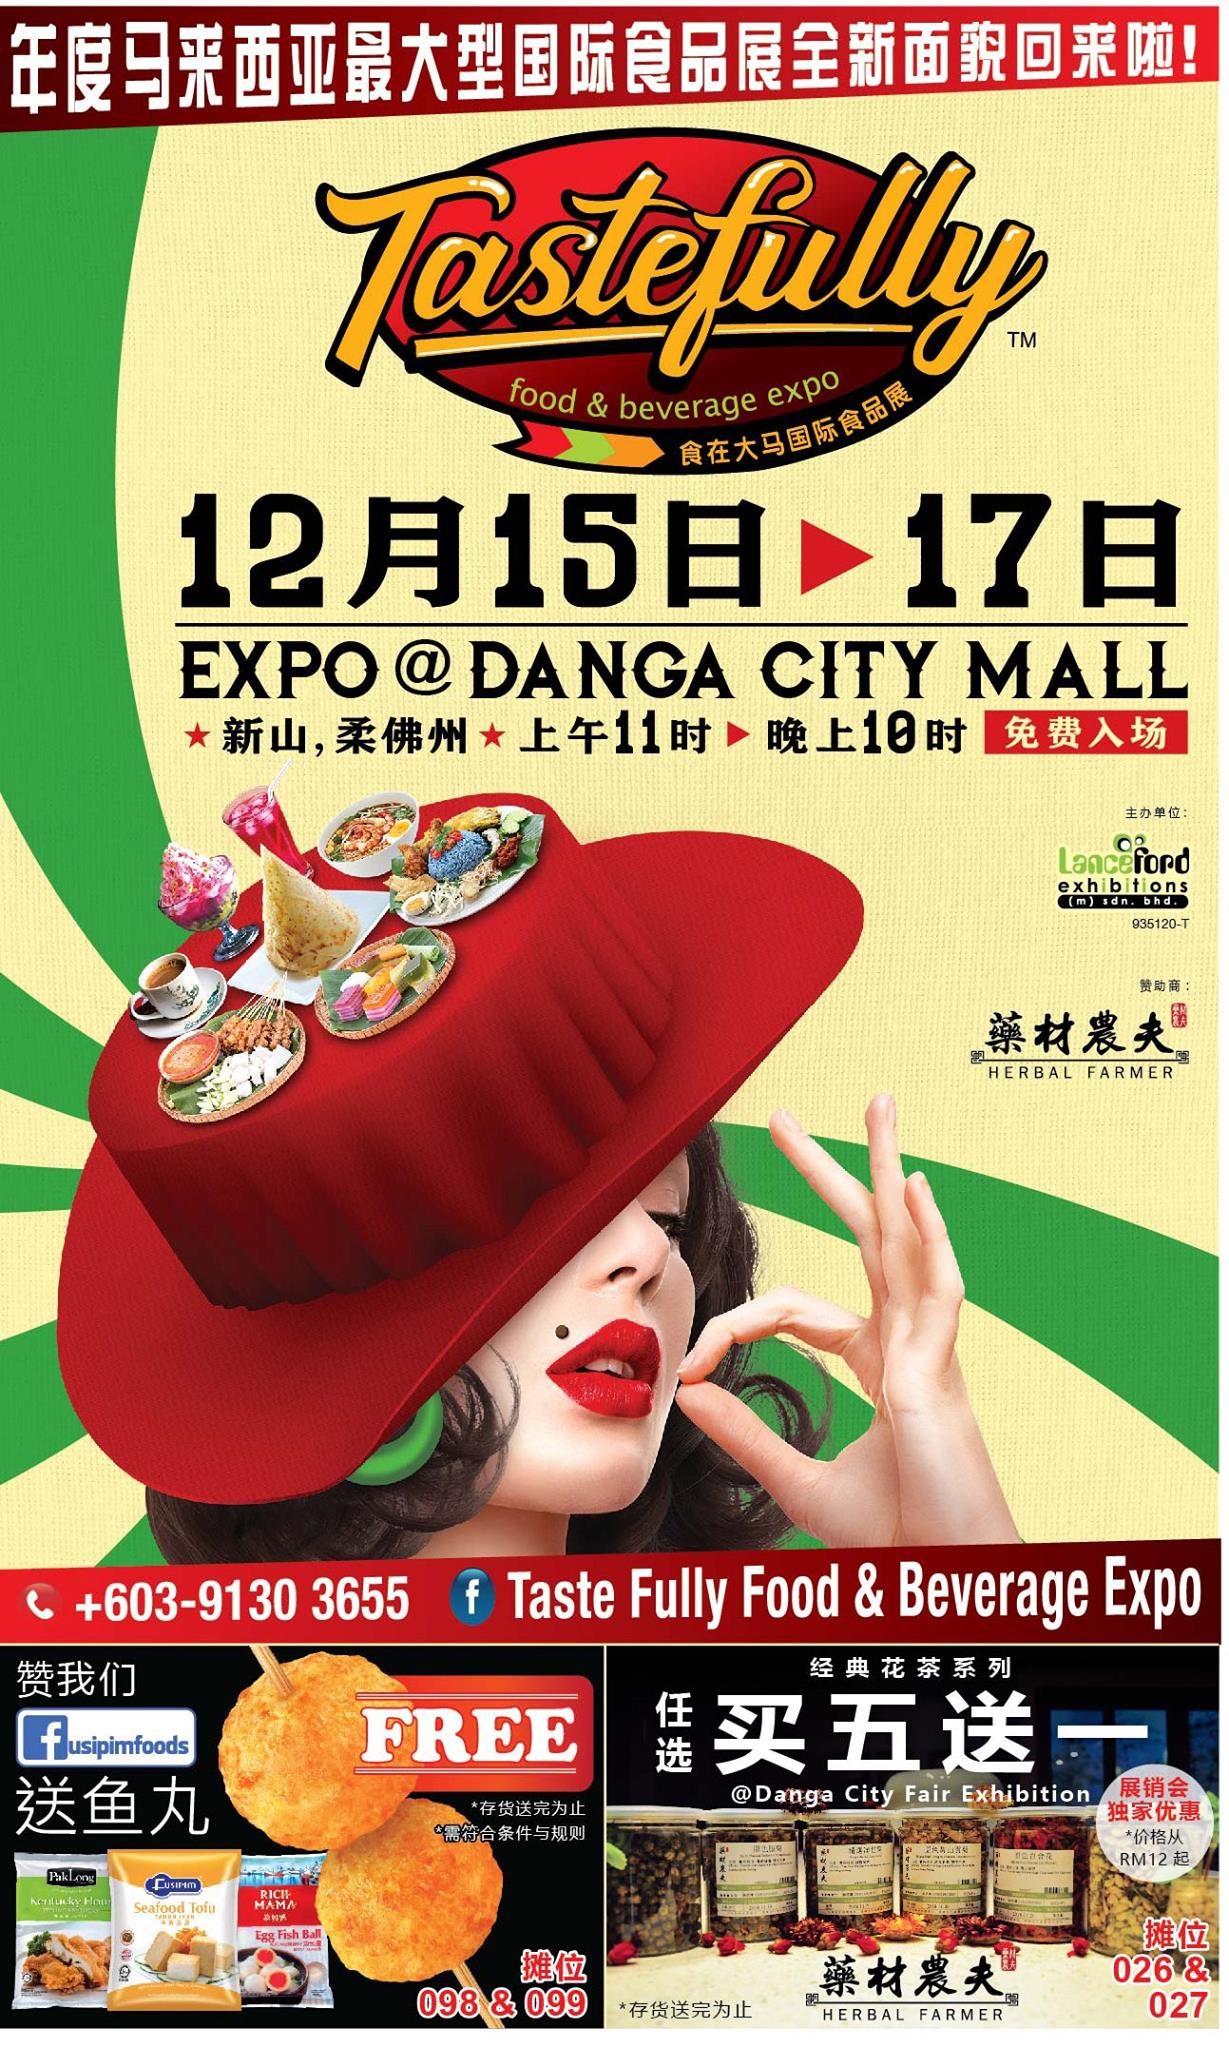 Shop All You Want at the Biggest Food Expo in The Country: Taste Fully